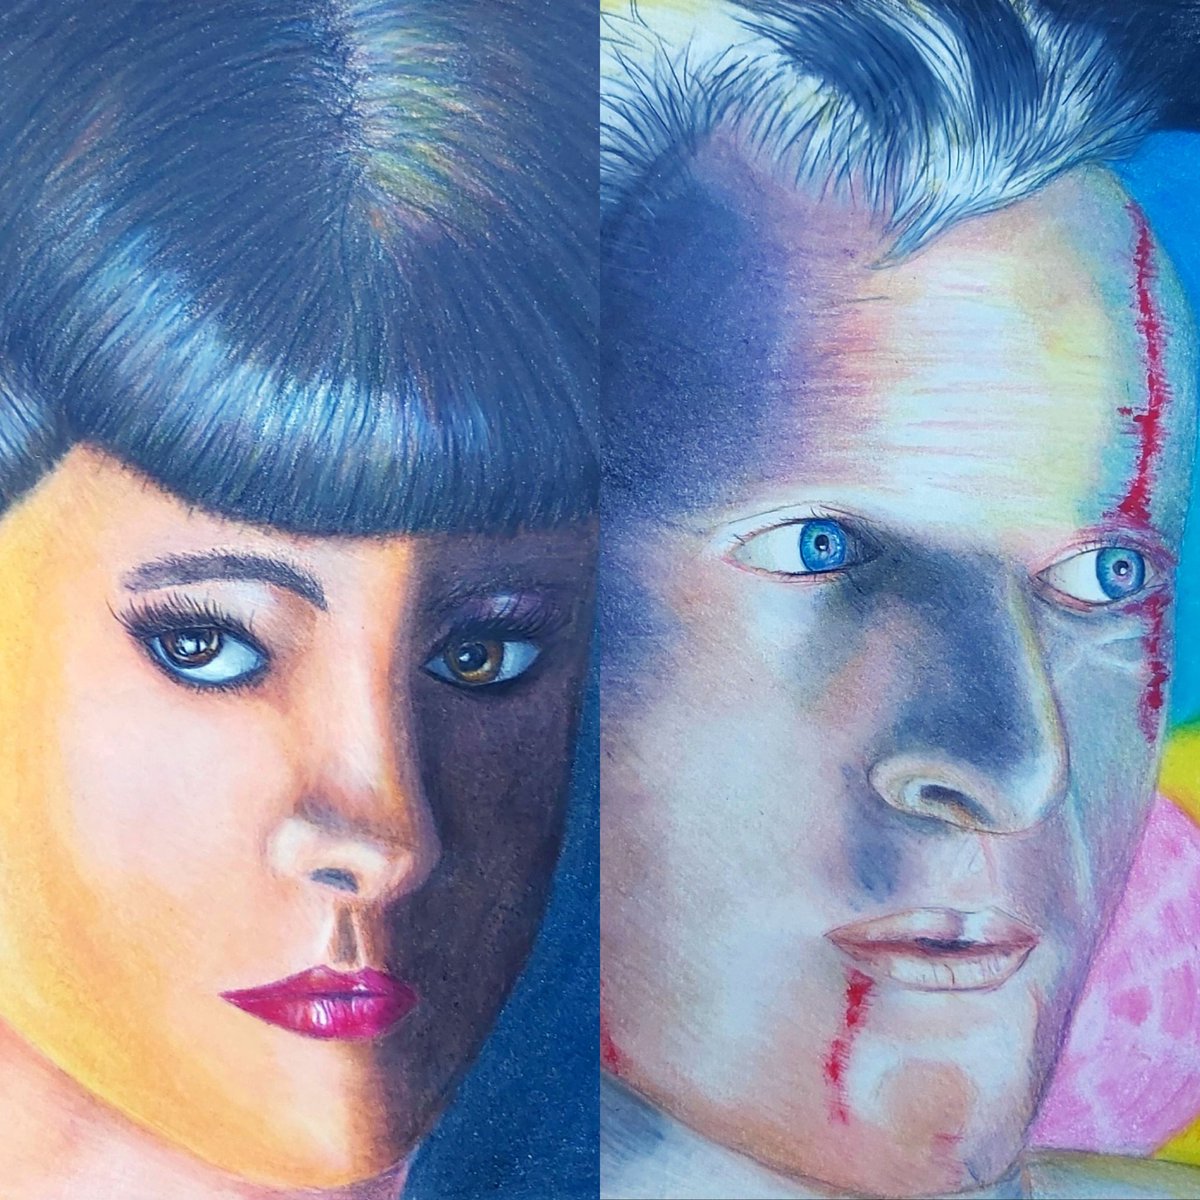 Do Androids Dream....part 2
Coloured pencil drawing 
#arteza #colouredpencil #coloredpencil #Pencildrawing #drawing #bladerunner #bladerunnerart